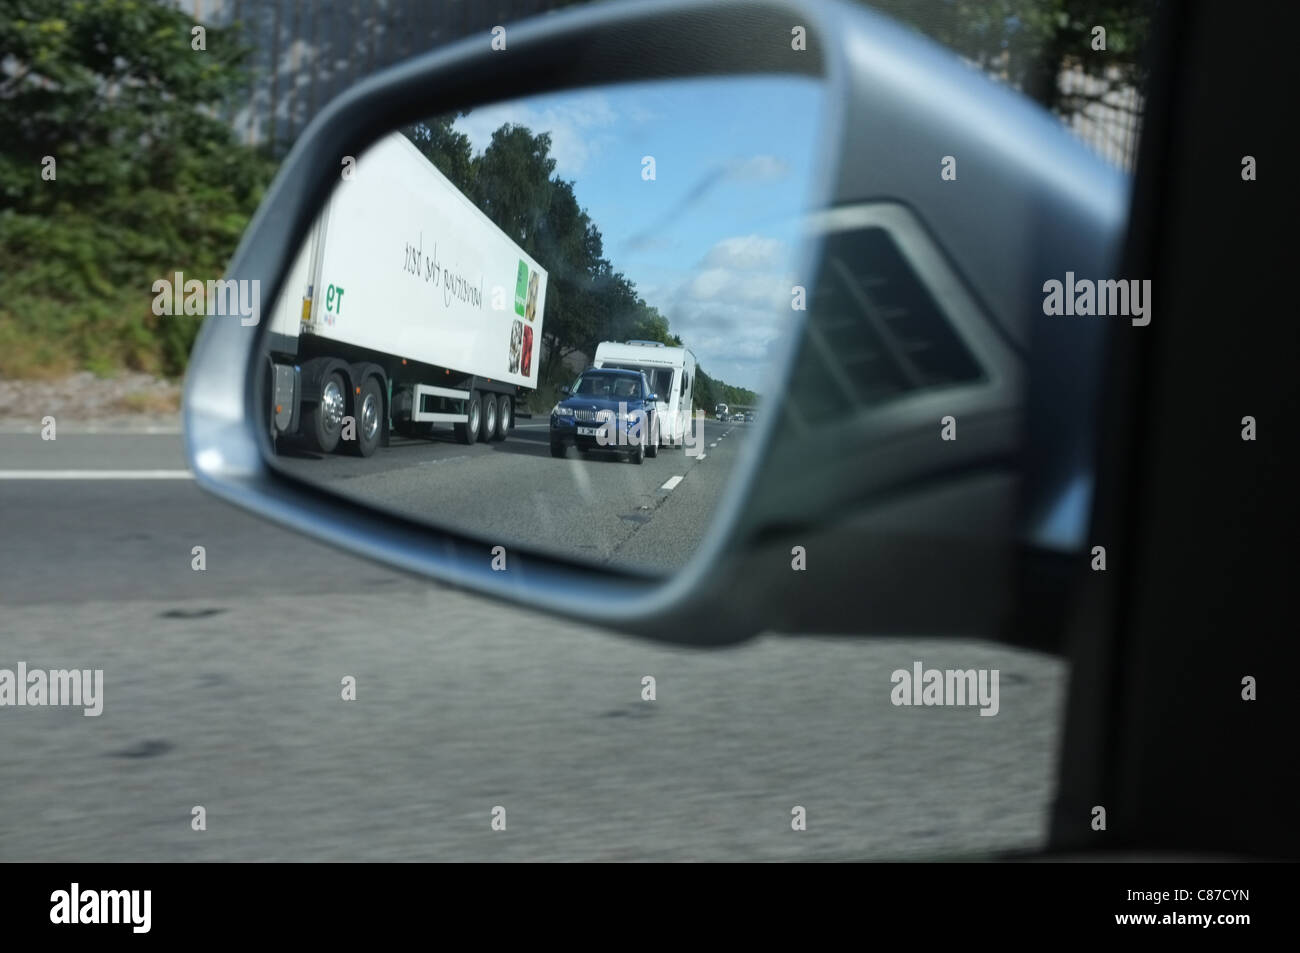 A car towing a caravan down the motorway reflected in a car wing mirror Stock Photo